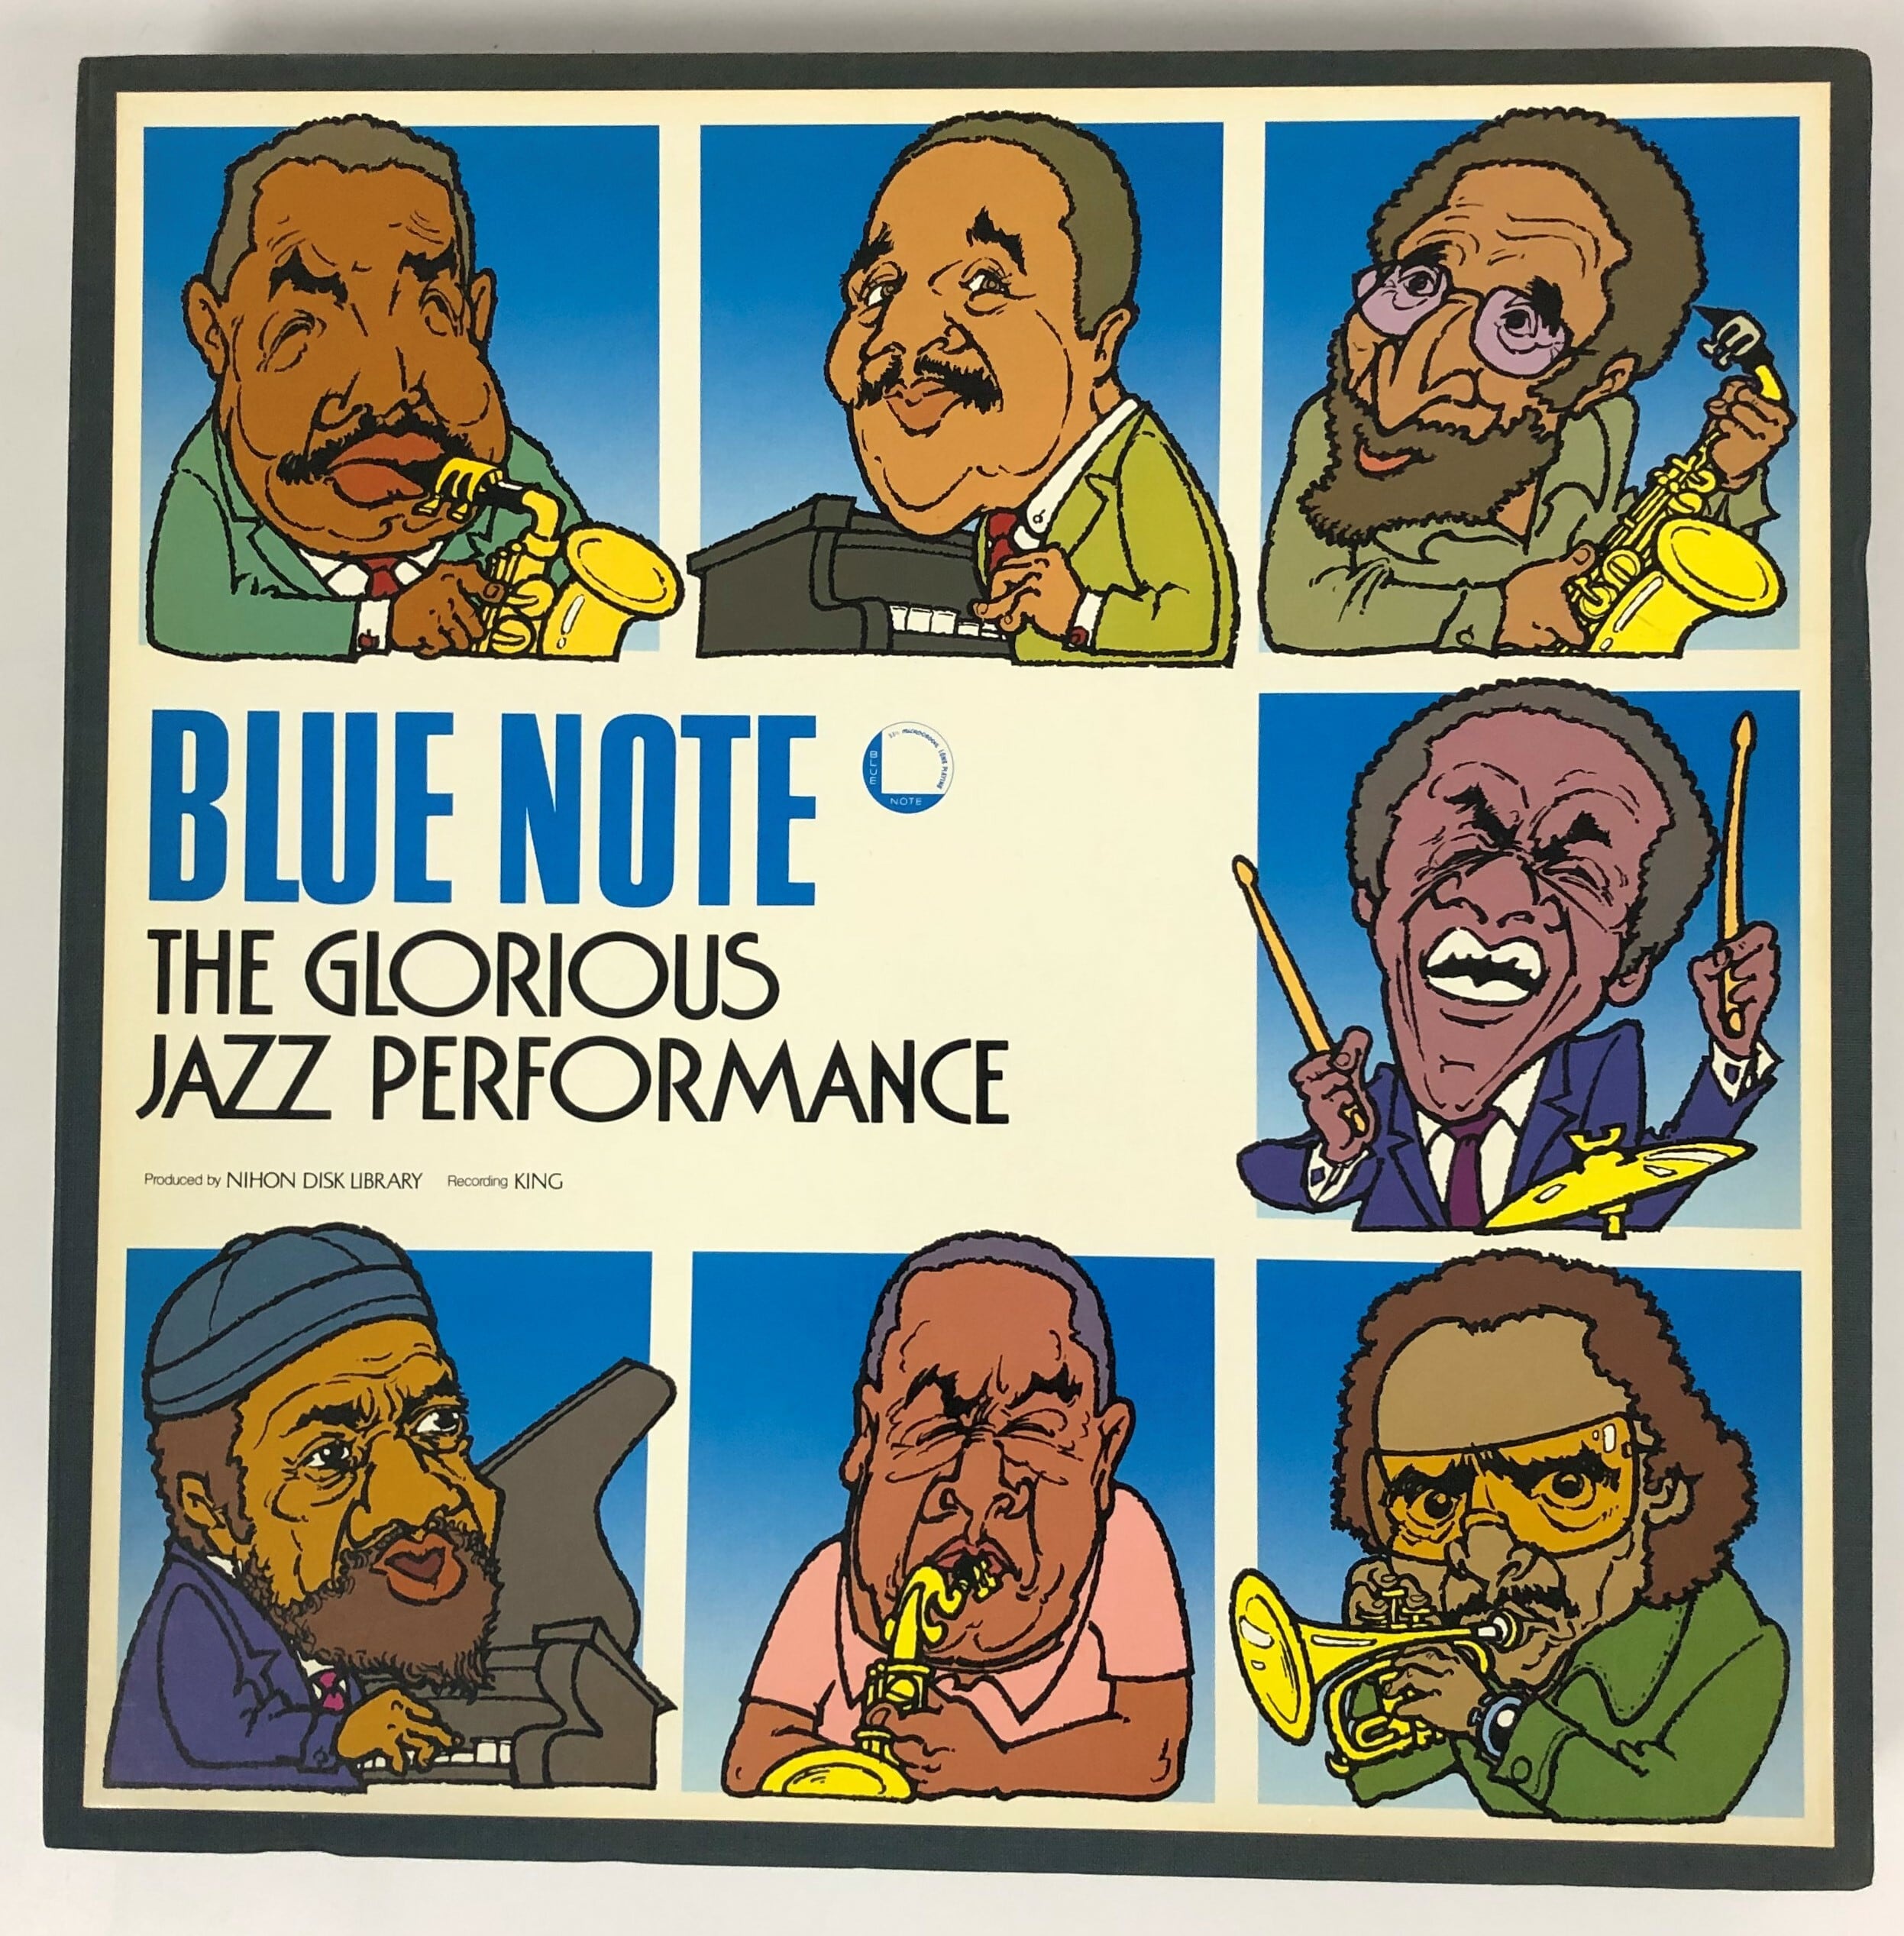 VA / Blue Note: The Jazz Glorious Jazz Performance | FISH FOR RECORDS